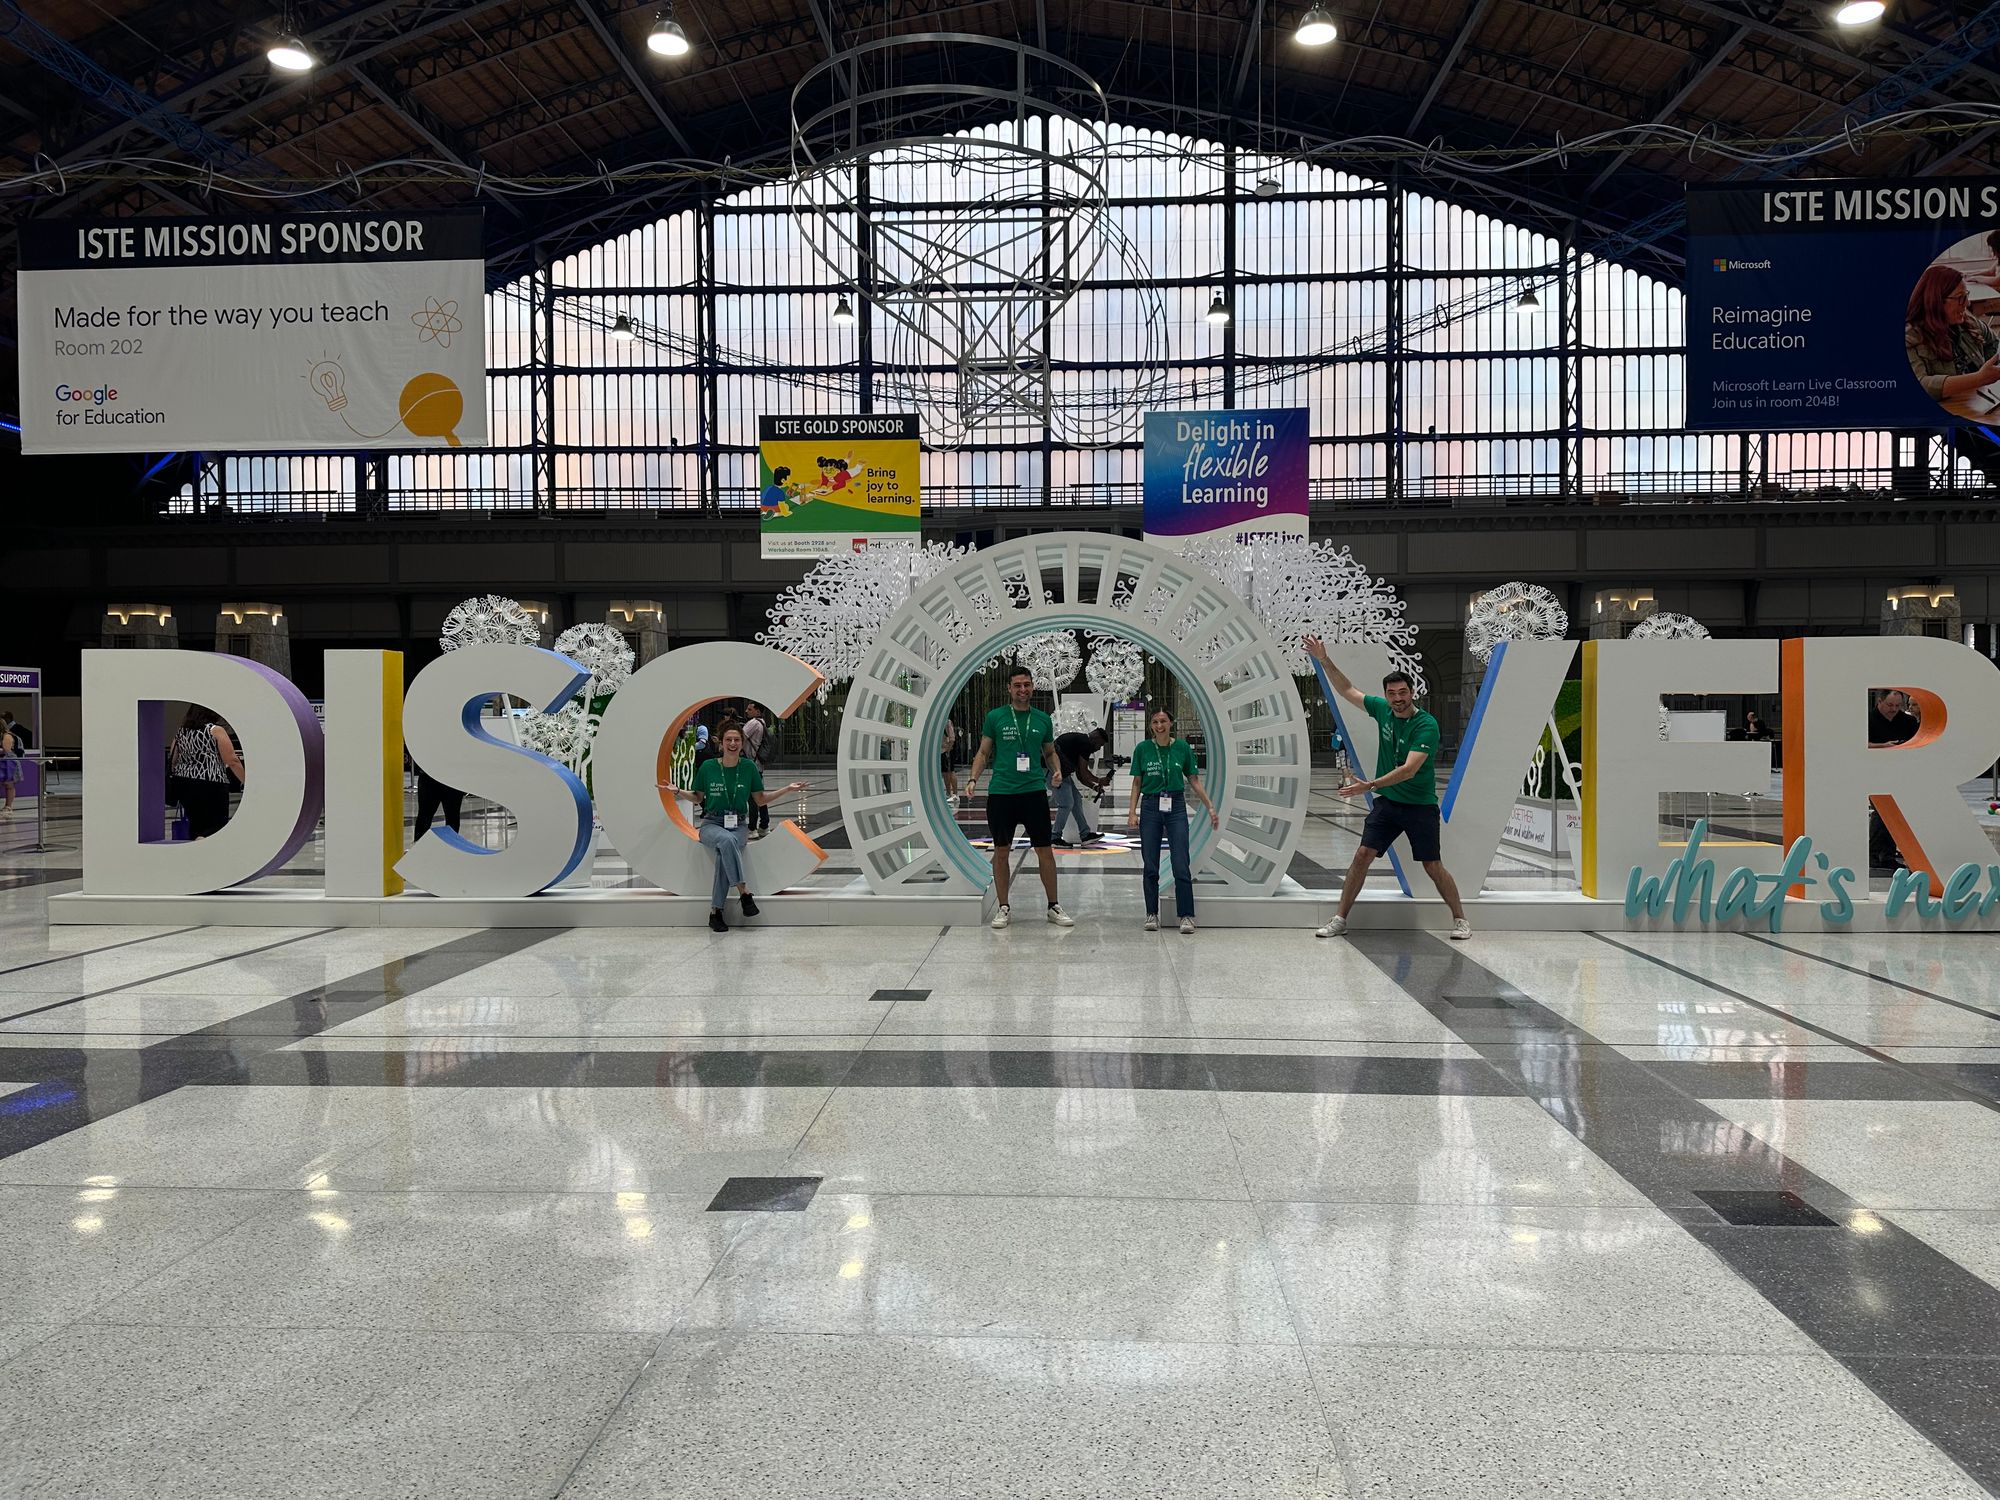 Notes of inspiration: A recap of our time at the ISTE Conference